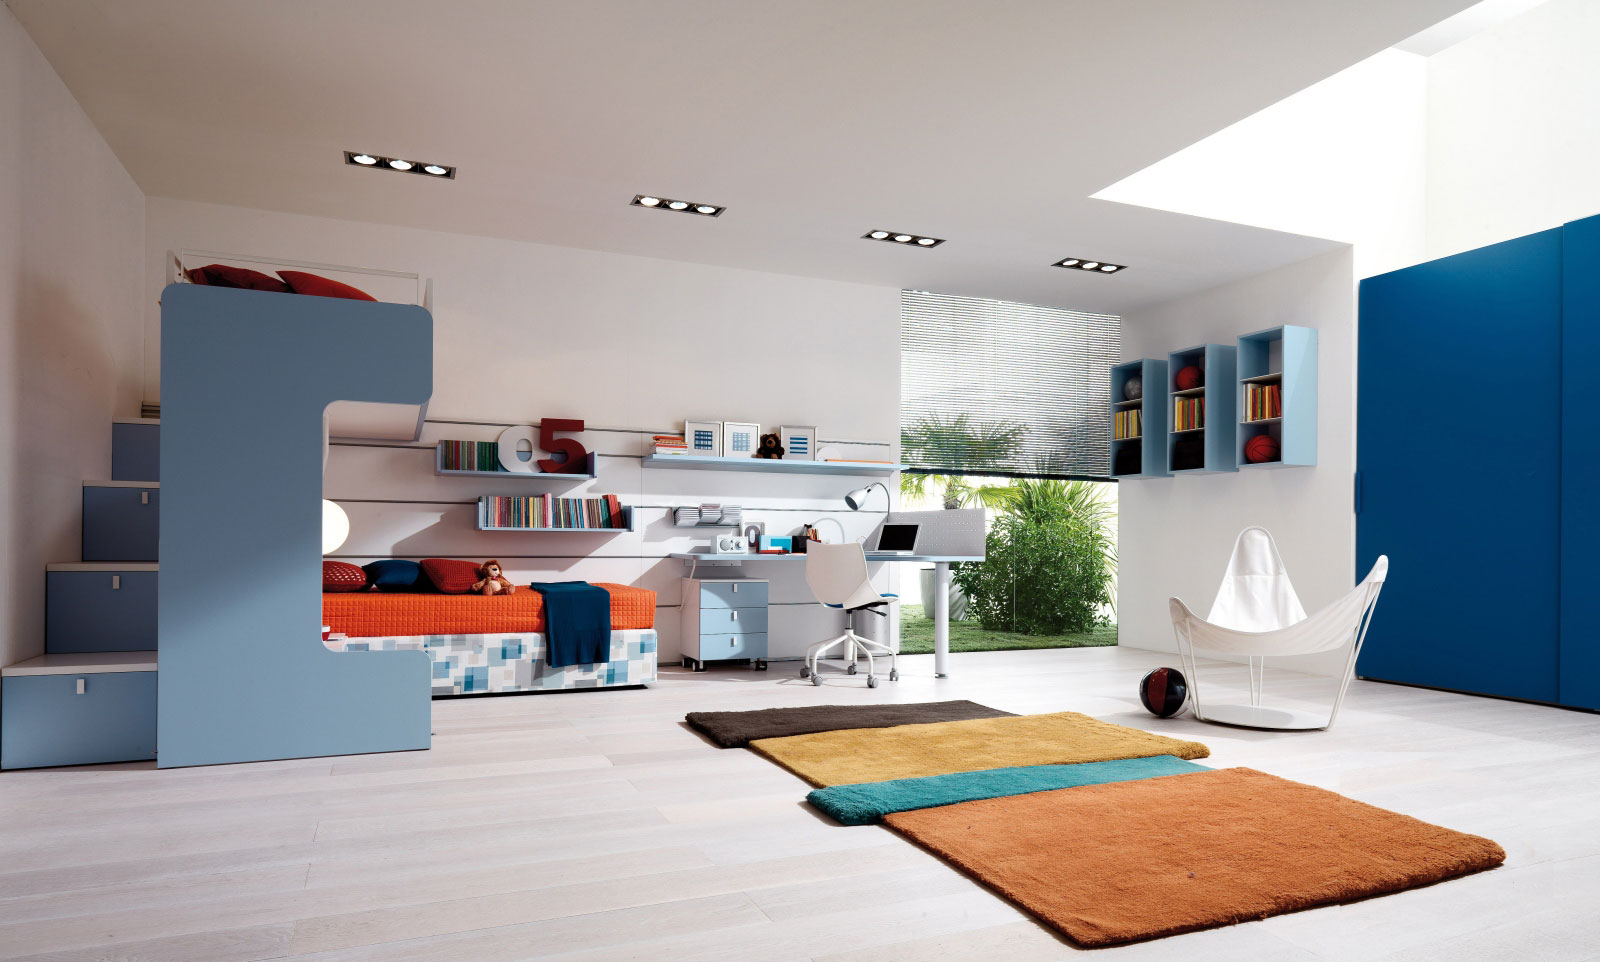 Stunning Cool Rooms For Kids Gallery Ideas cool kids rooms